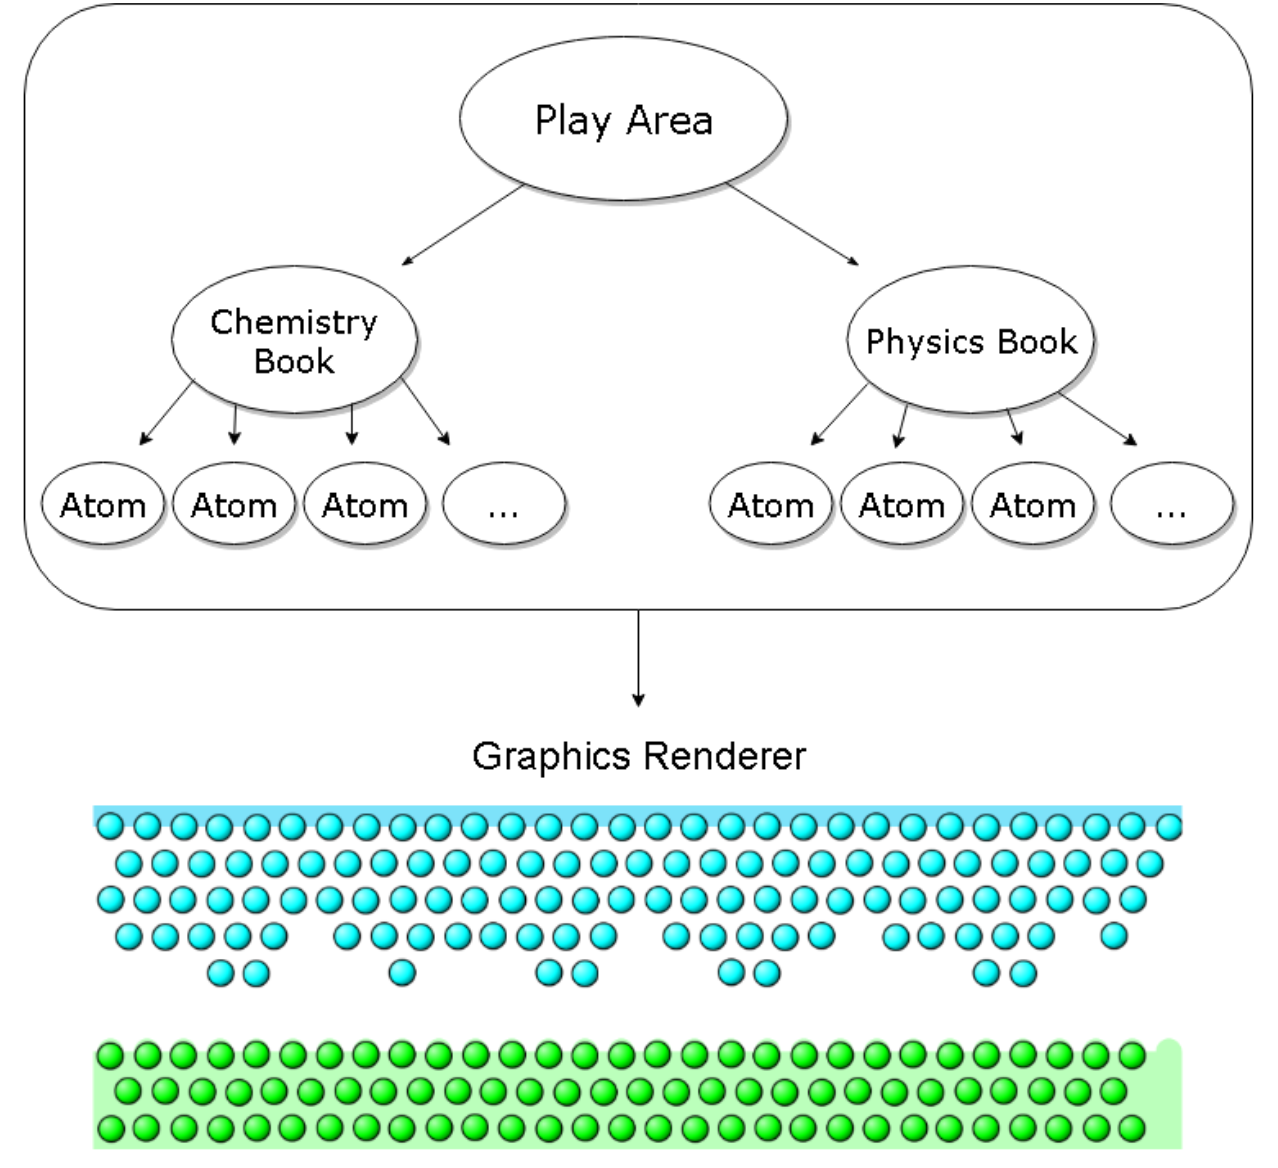 A diagram representing a scene graph data structure. The diagram 
      is a tree-like hierarchy. At the root of the tree is a box labelled 'Play Area'. Out of this node are two arrows: one pointing to a child node
      labelled 'Physics Book' and the other pointing to a node labelled 'Chemistry Book'. From each of these books are a number of arrows each pointing to
      child nodes labelled 'Atom'. Beneath this diagram is an arrow pointing to the rendered image, which shows a physics book and a chemistry book made of
      atoms in a play area.